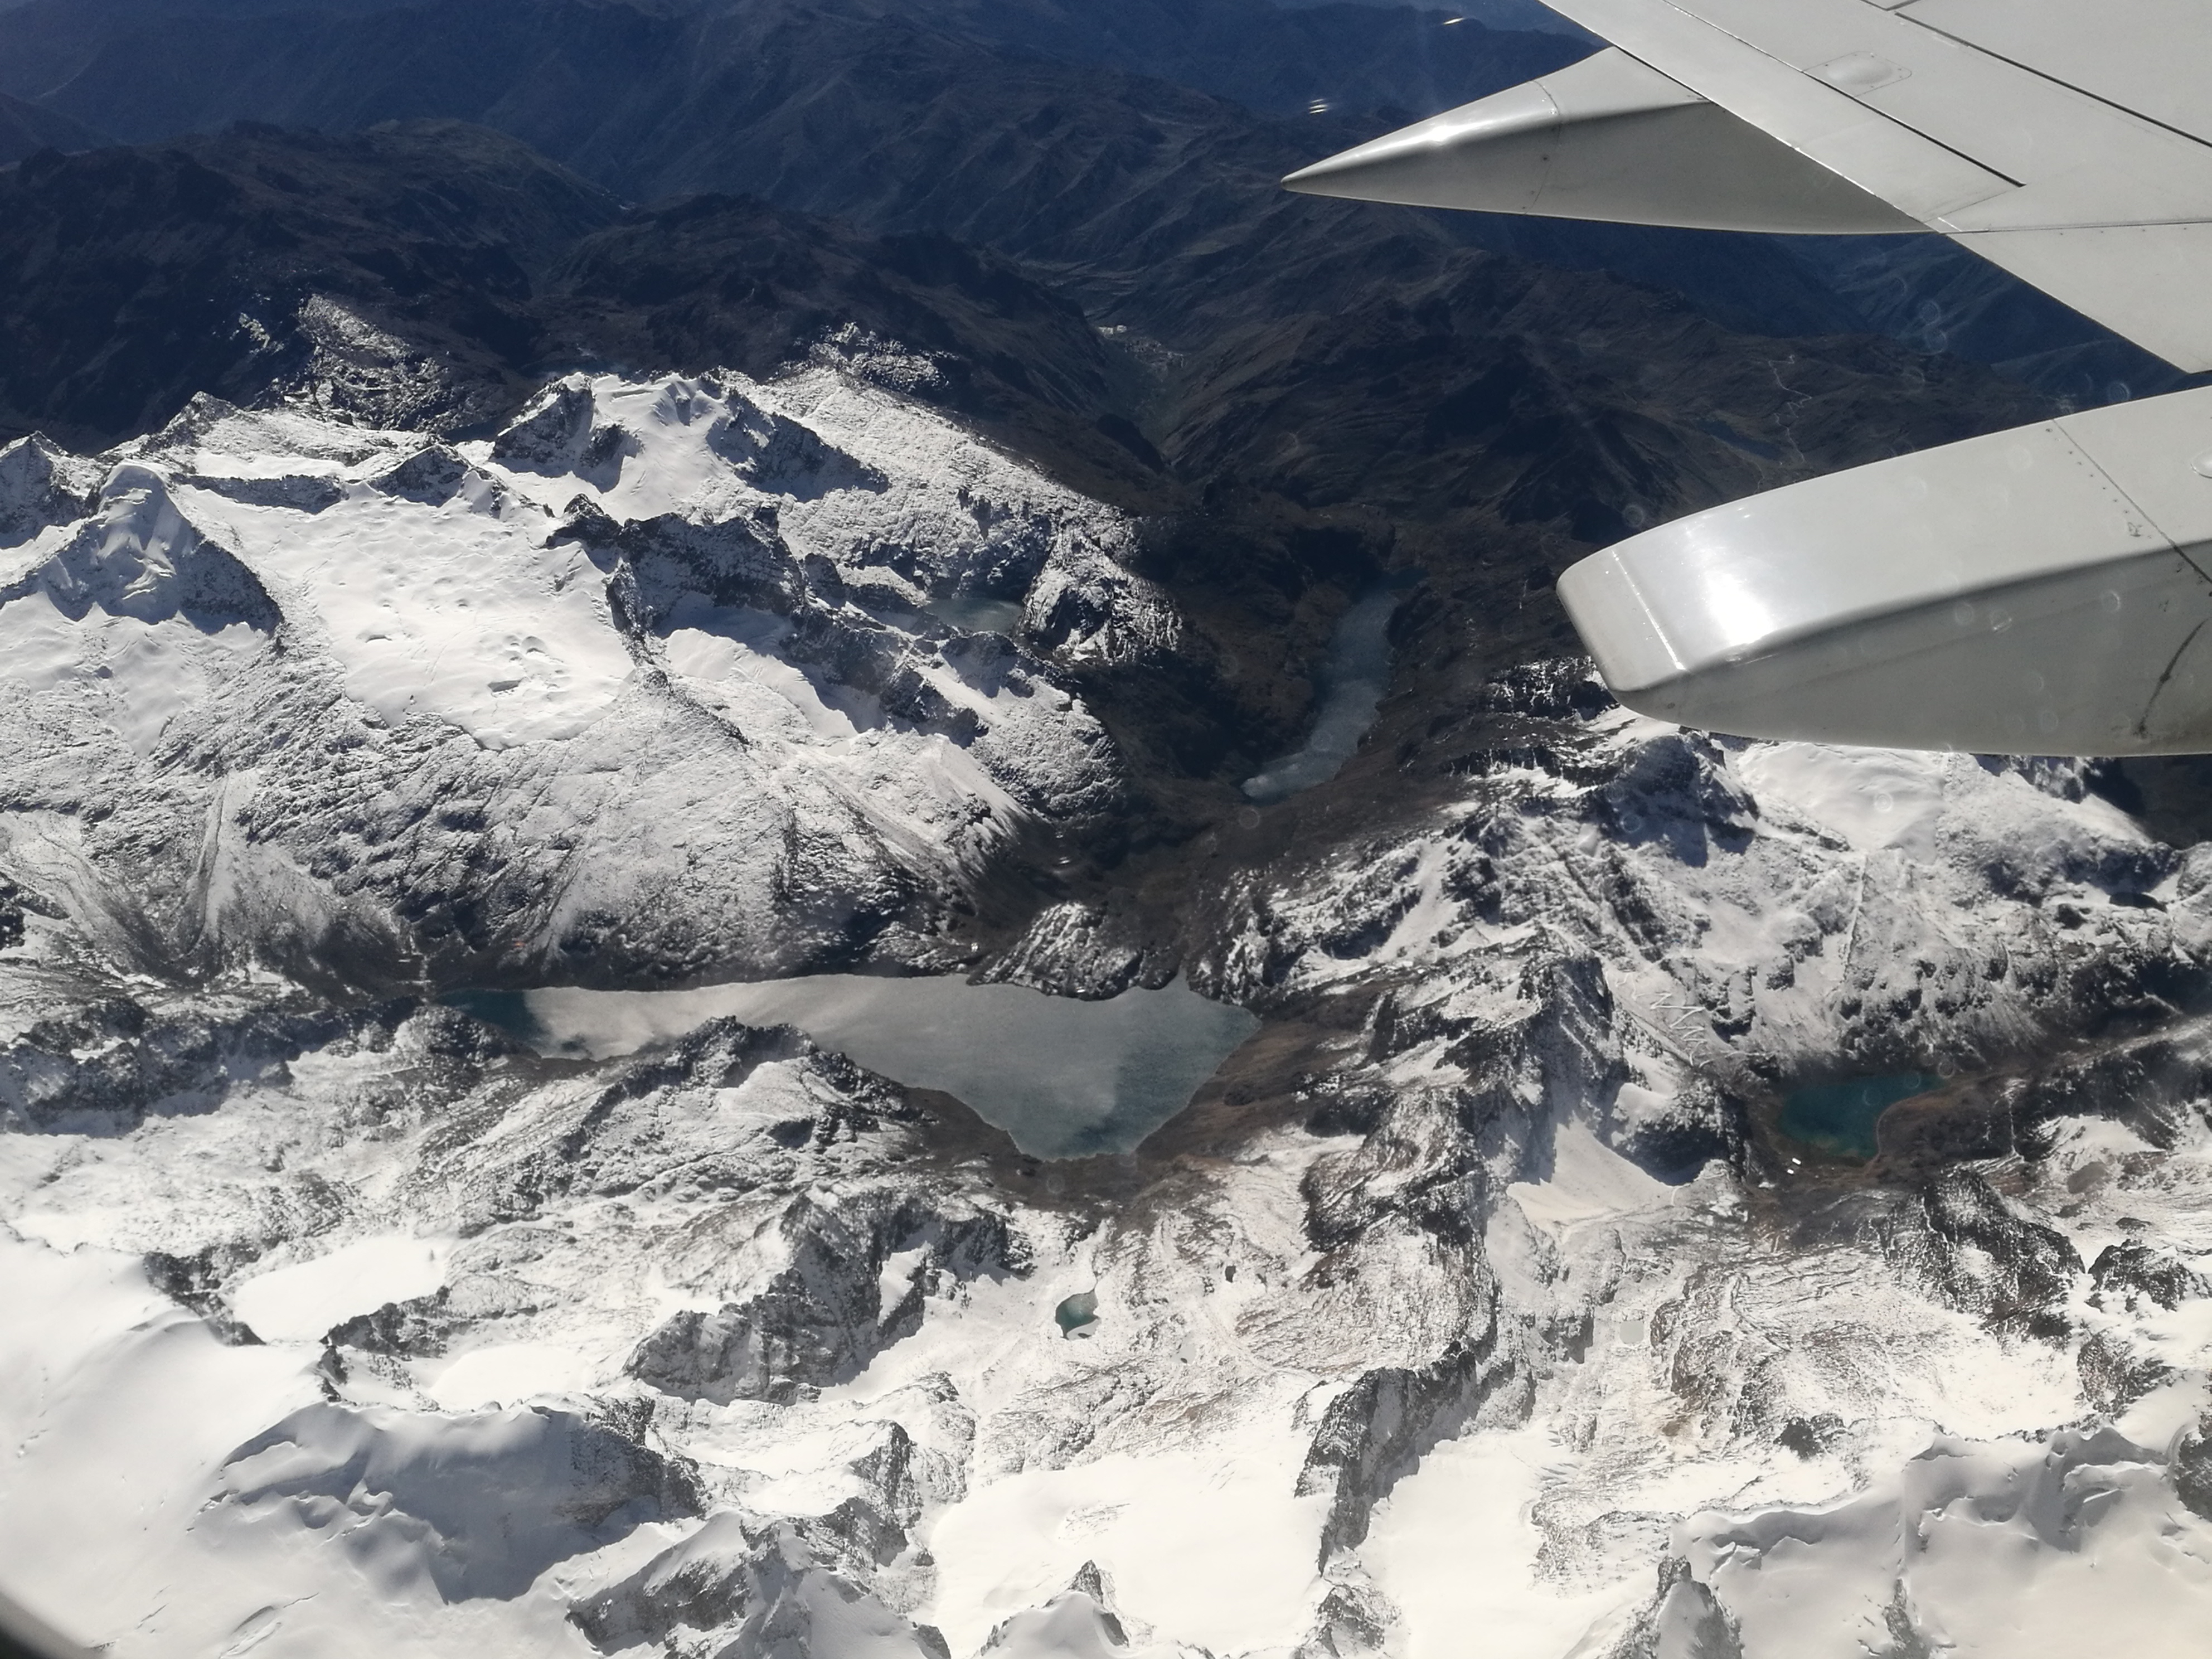 Recently fallen (and needed!) snow adorns the Bolivian Andean mountains.